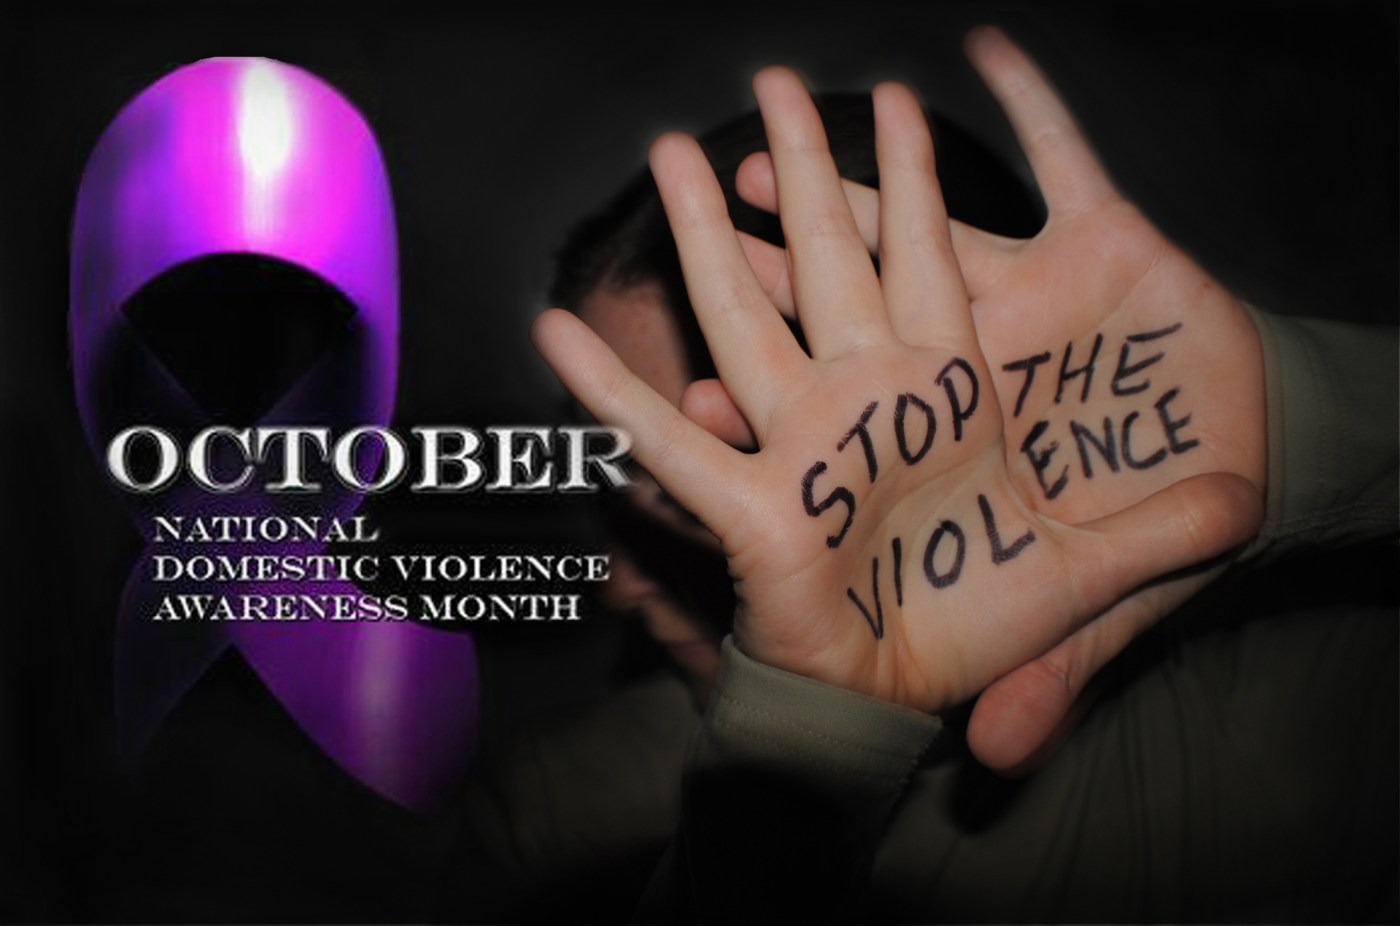 October 2018 is Domestic Violence Awareness Month